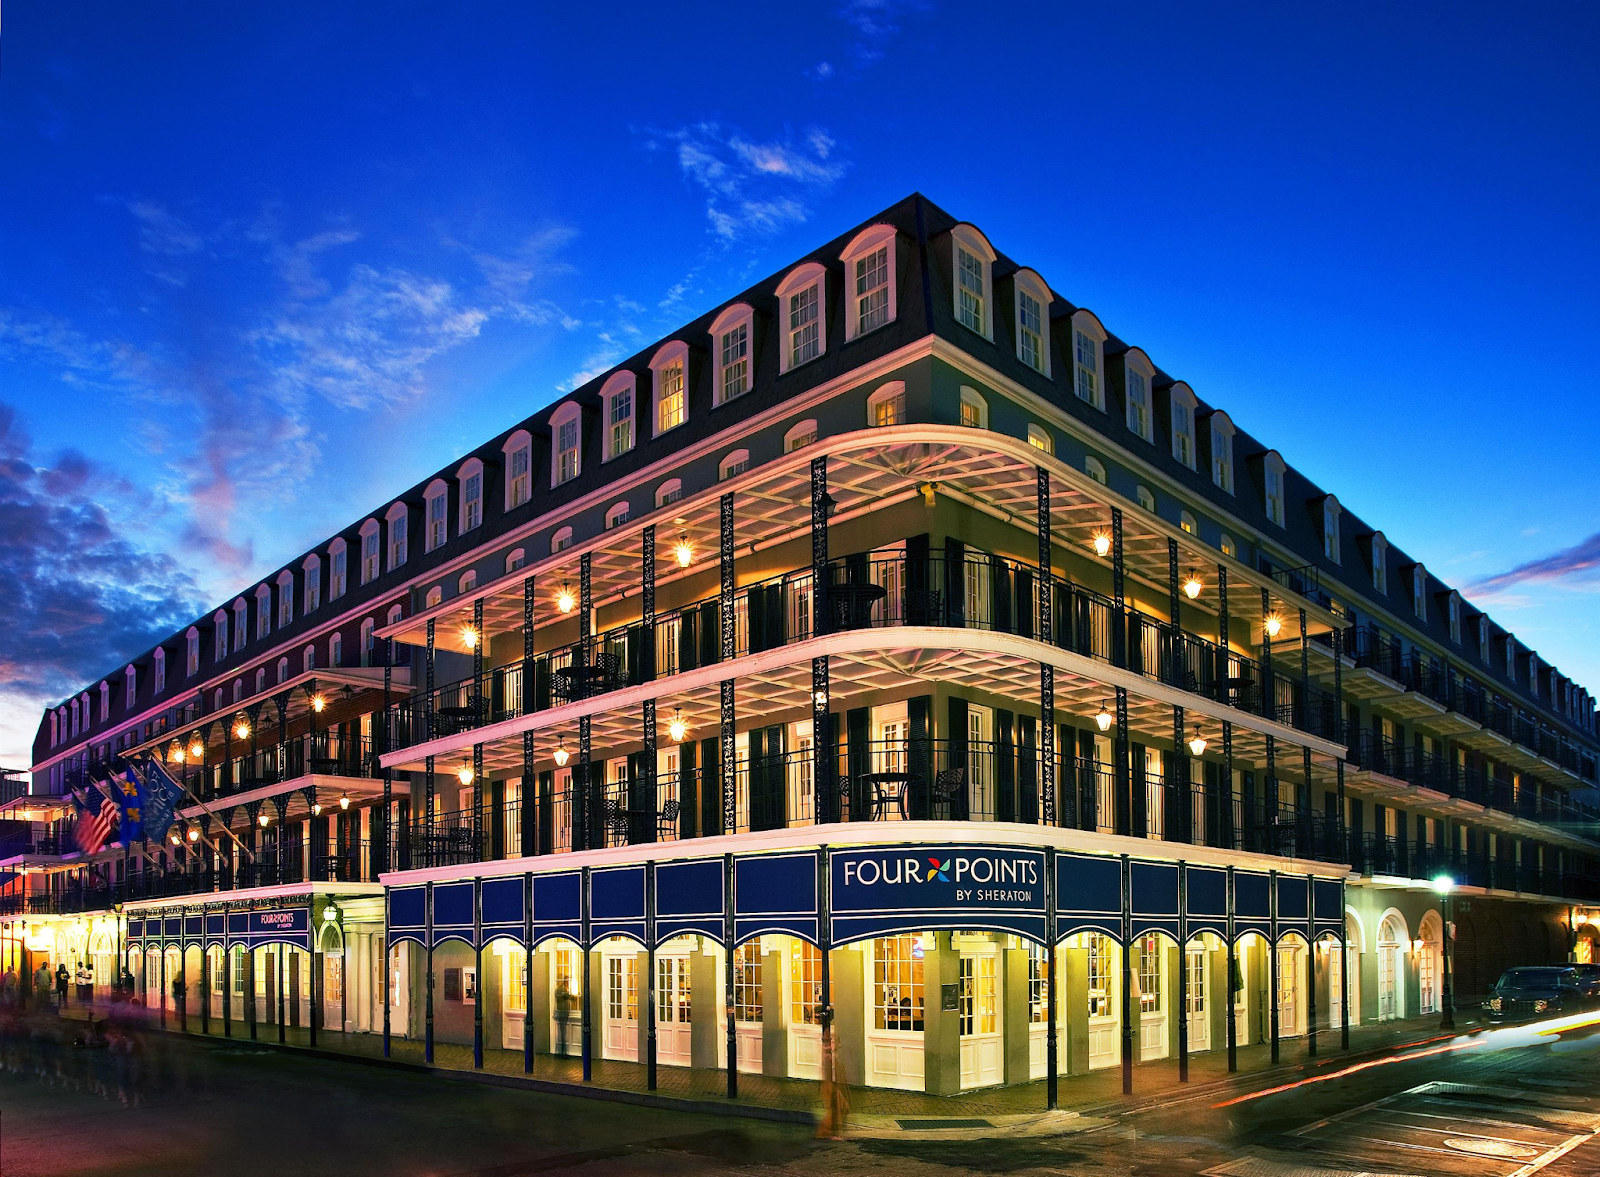 The Bourbon Orleans Hotel is a historic hotel.